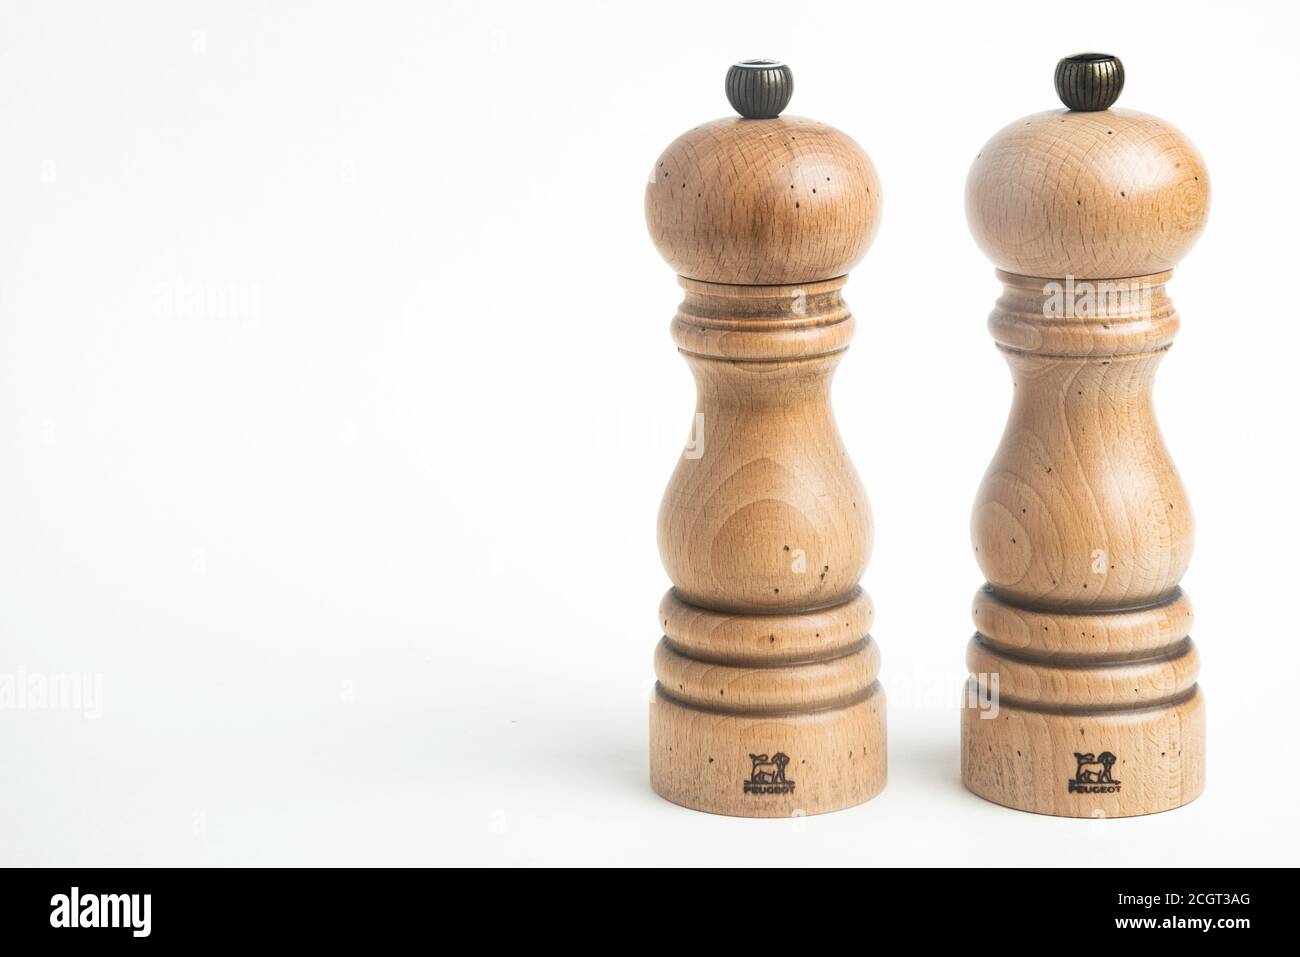 Vidalia, Georgia / USA - May 5, 2020: A medium-size iconic Paris model of the Peugeot pepper and salt mill set in natural wood with metal jewel knob. Stock Photo